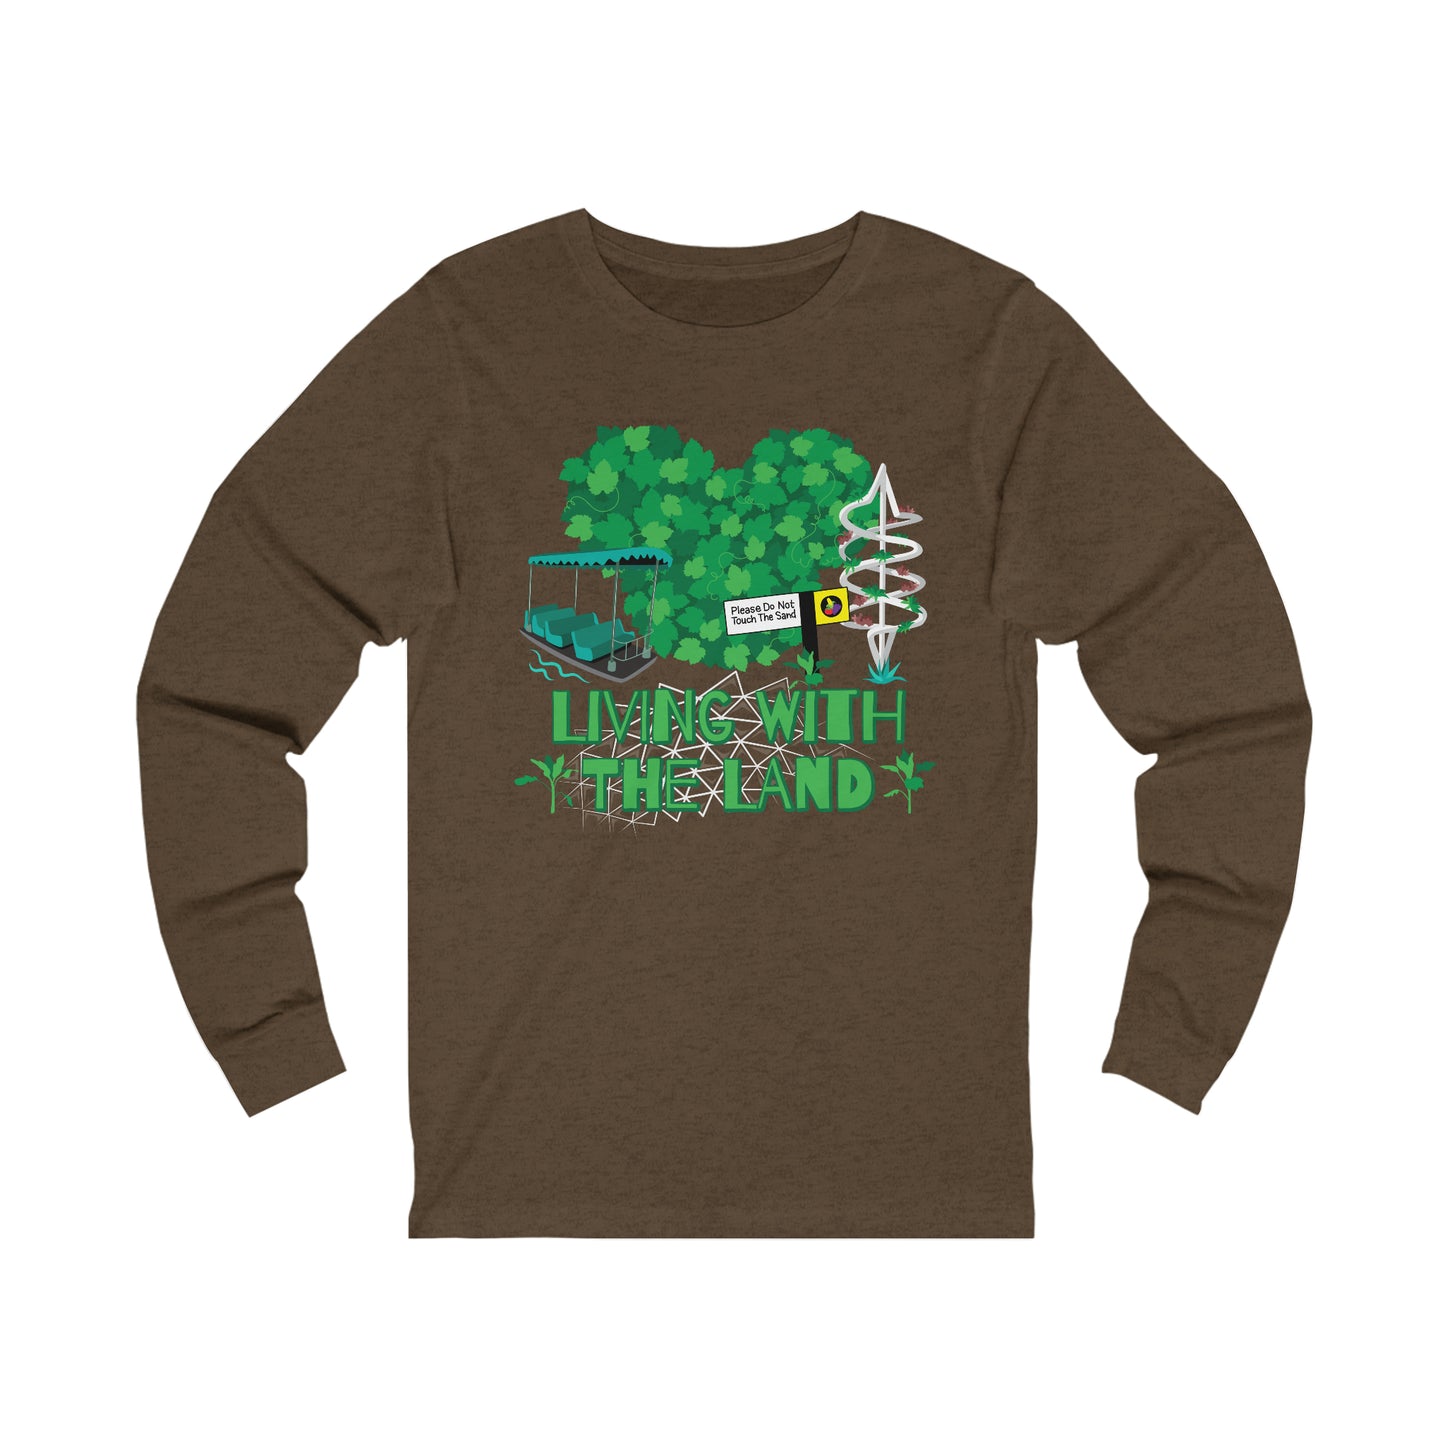 Living With The Land Unisex Long Sleeve Graphic Tee